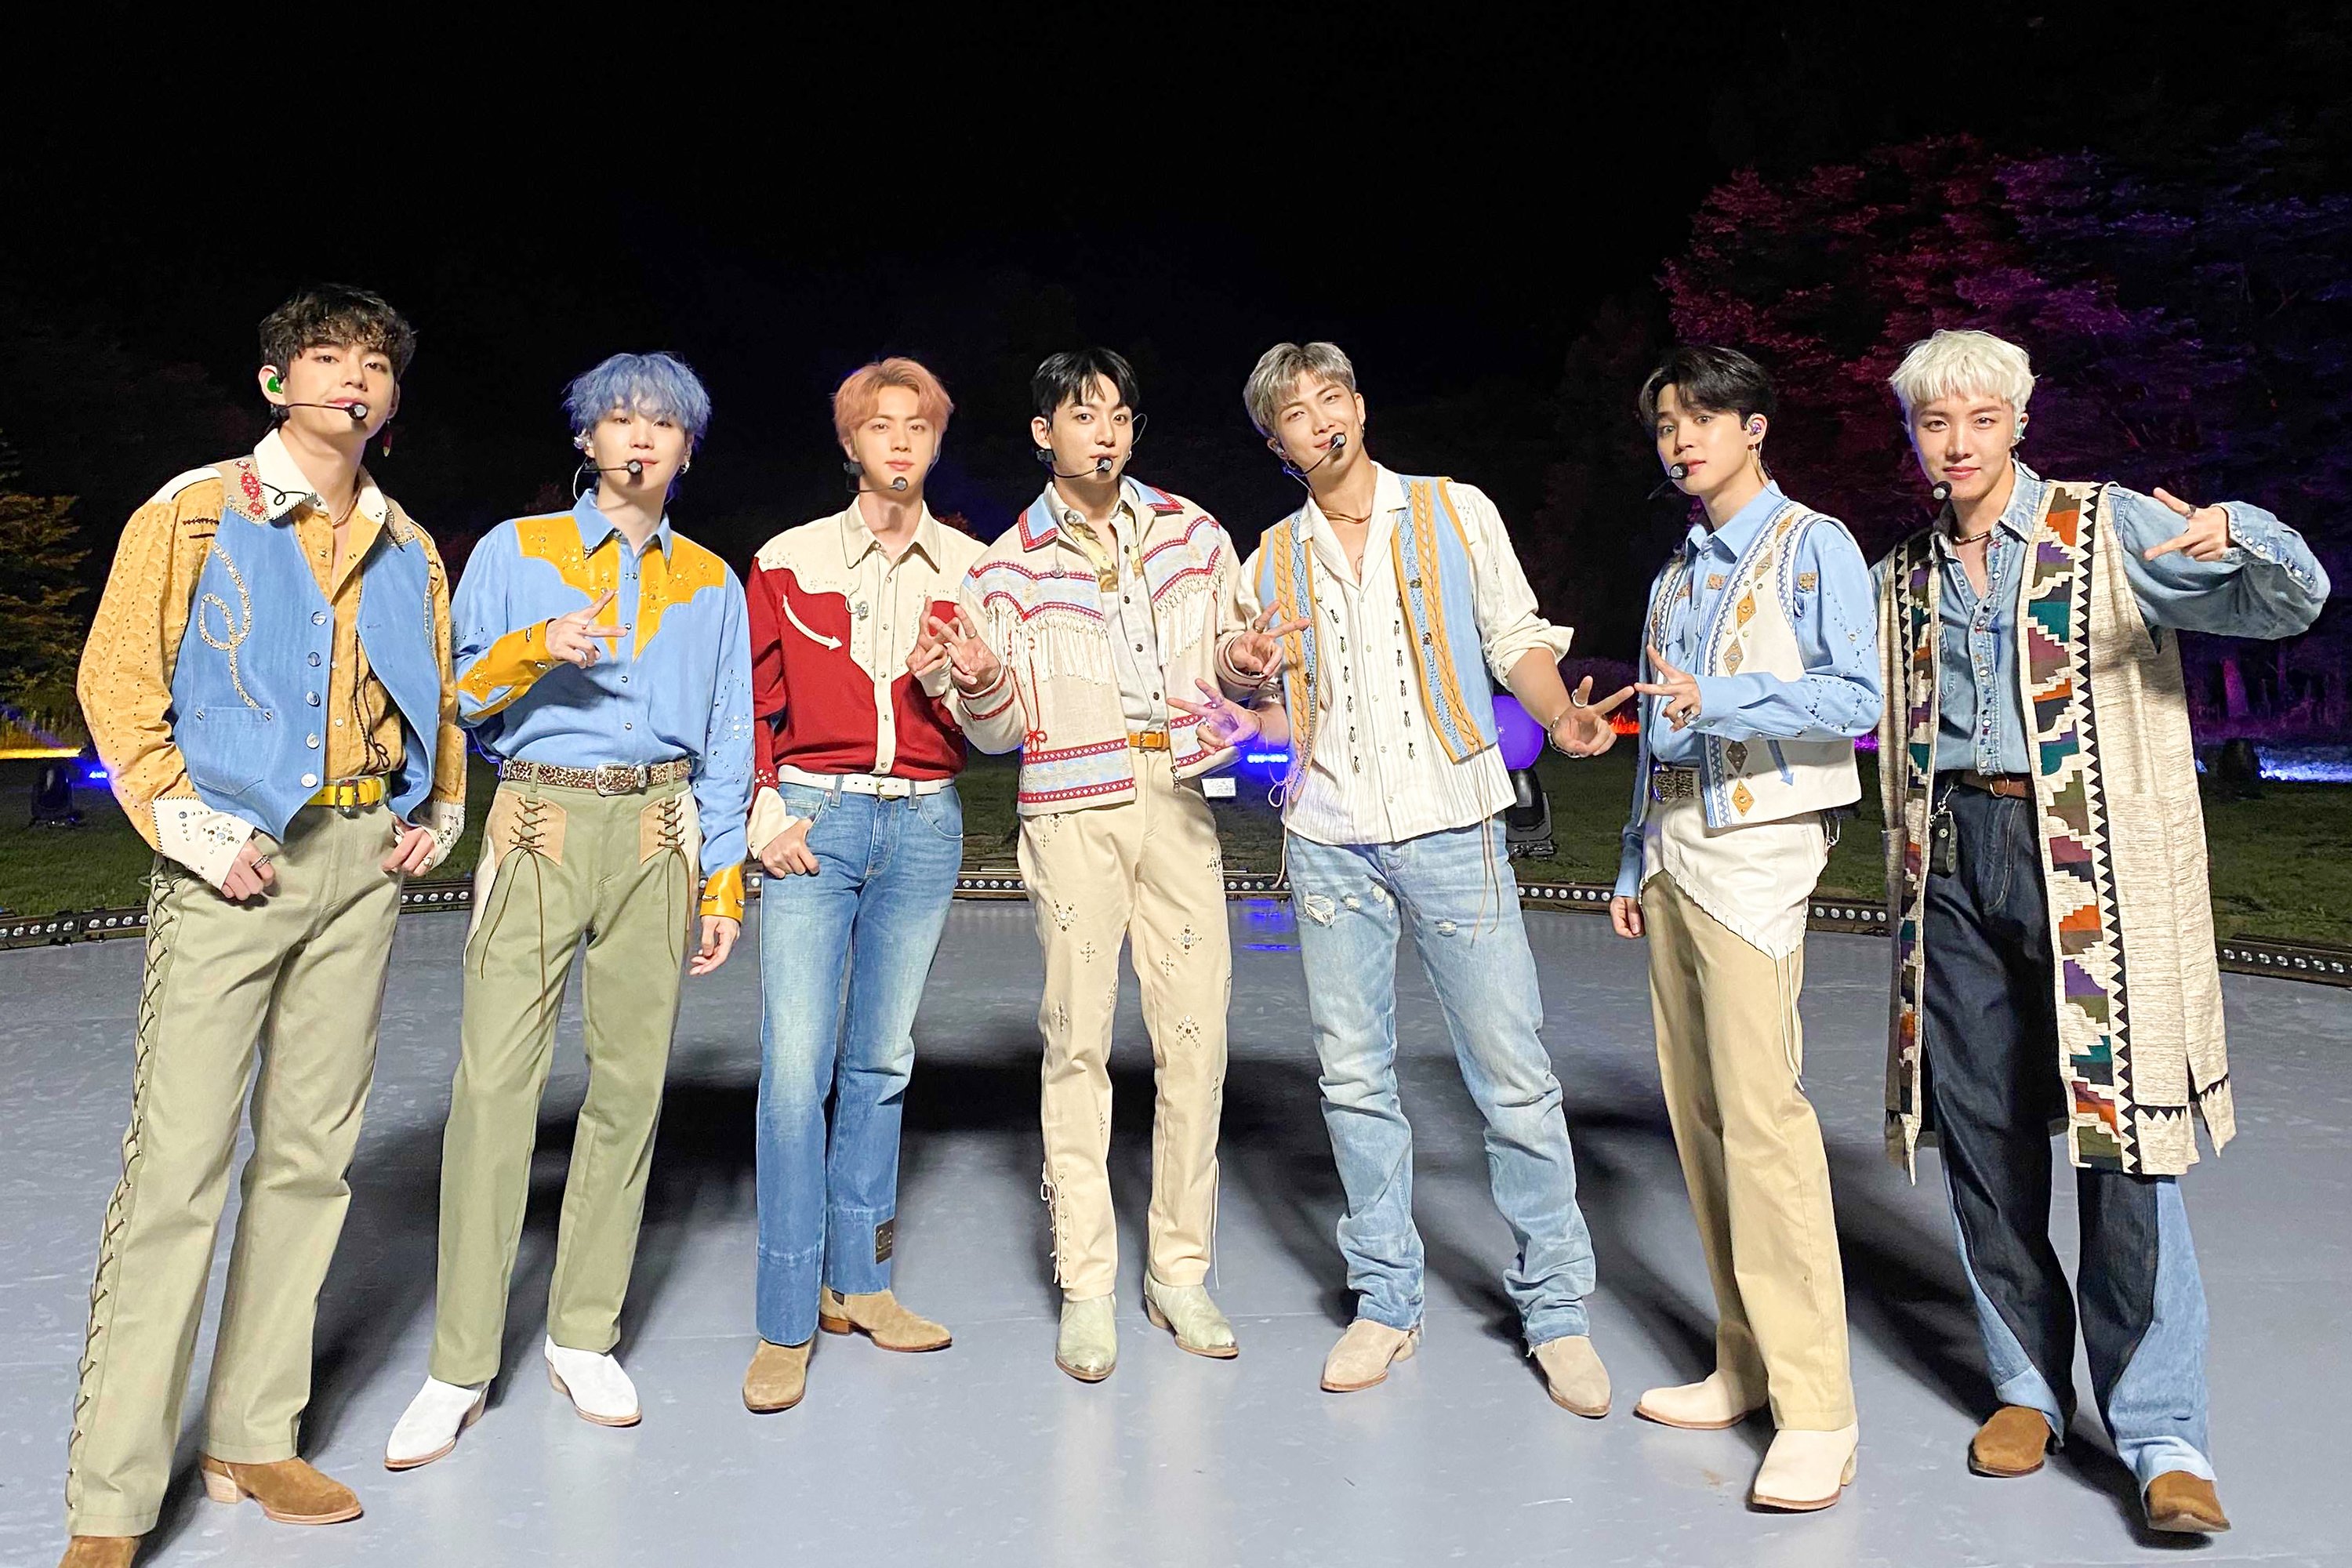 Bts Releases Yet Another Catchy Summer Bop Permission To Dance And Invites You To Dance With Them In Music Video